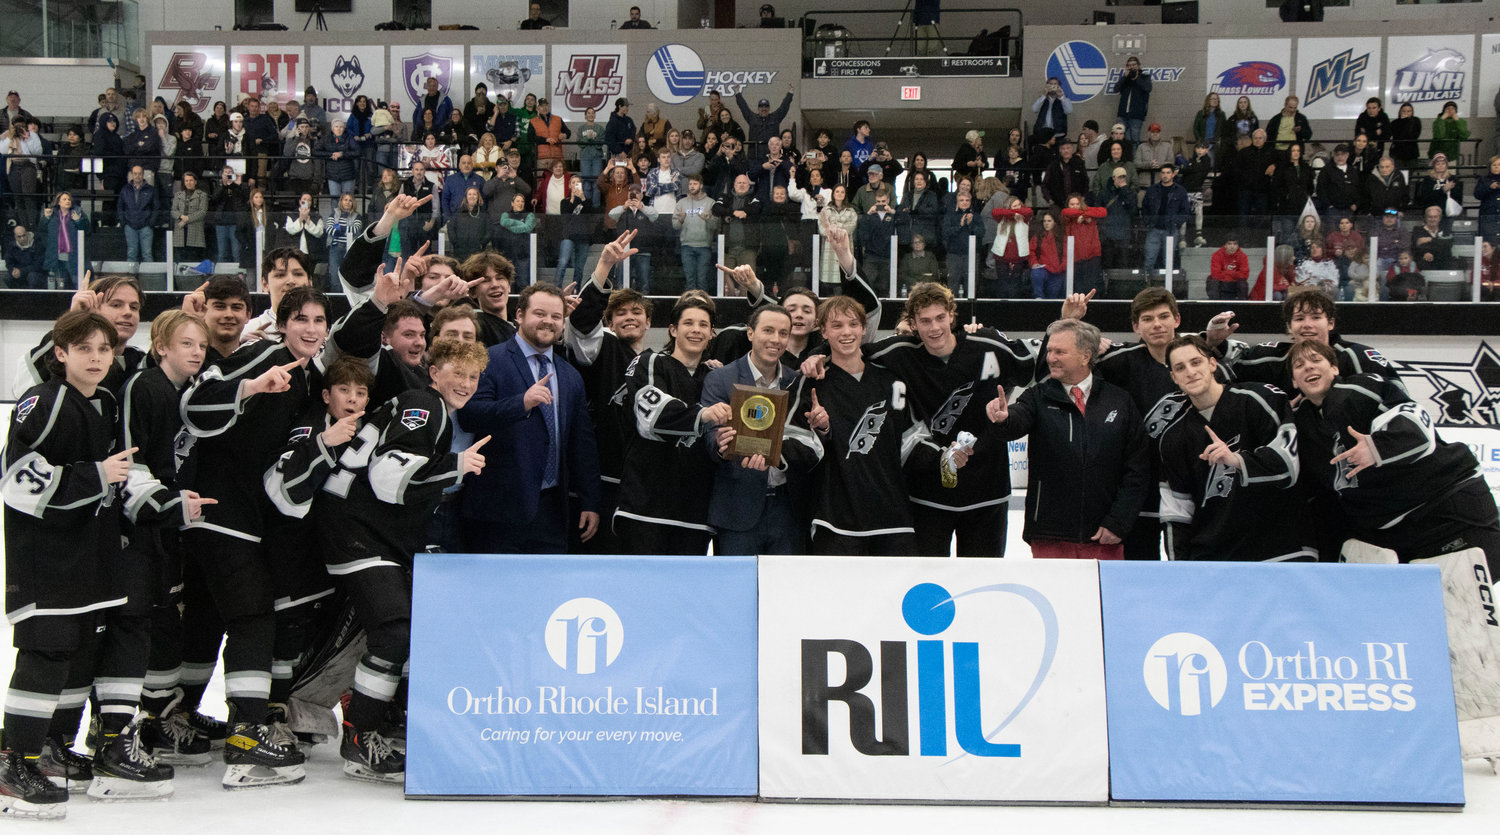 RMT team photo with the Division II Championship trophy.